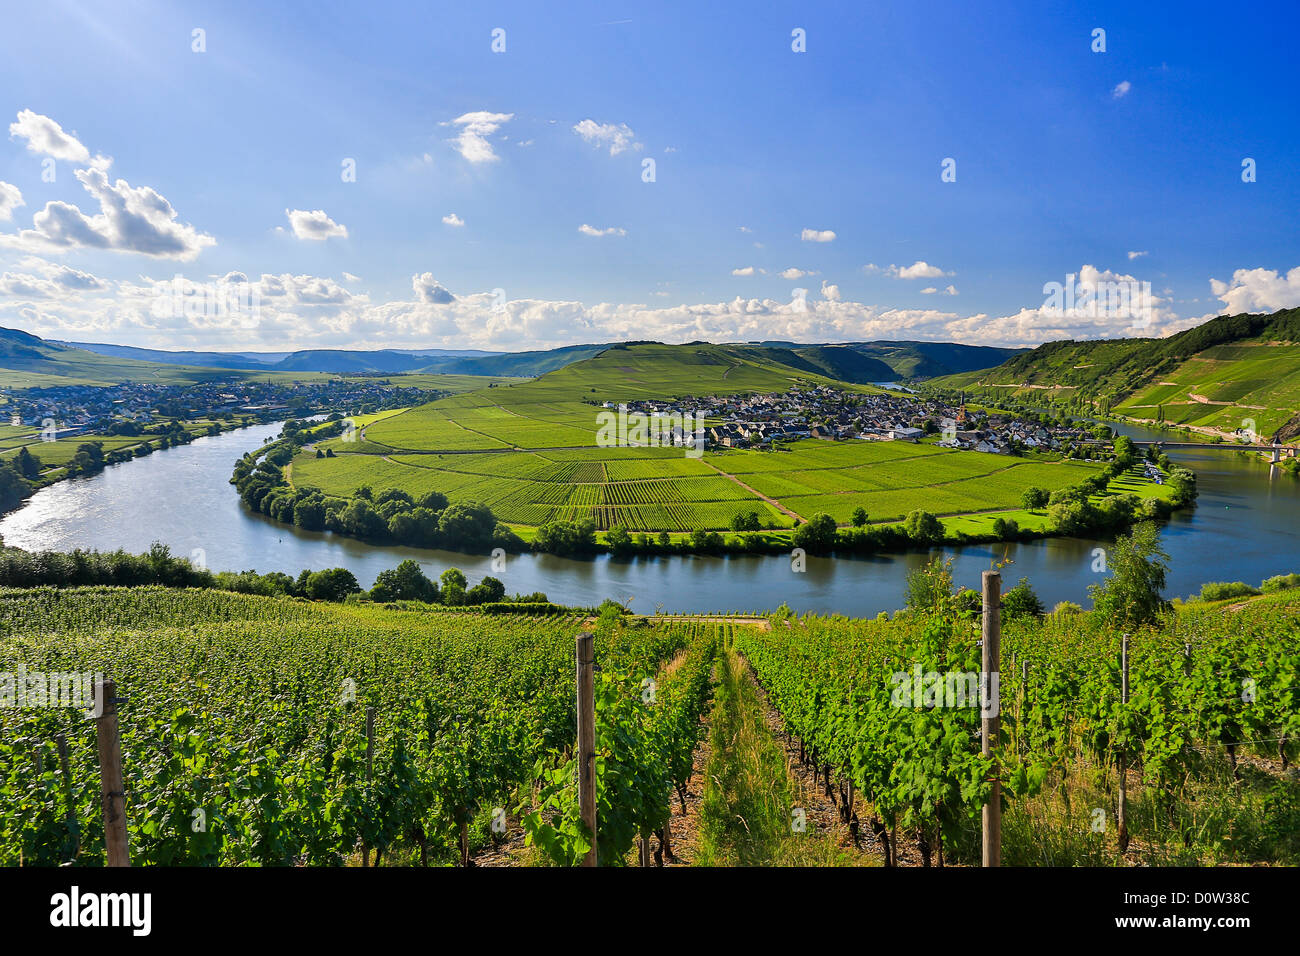 Germany, Europe, travel, Moseltal, Moselle, Trittenheim, Moselle, River, vineyards, agriculture, bend, clouds, Mosel, nature, to Stock Photo